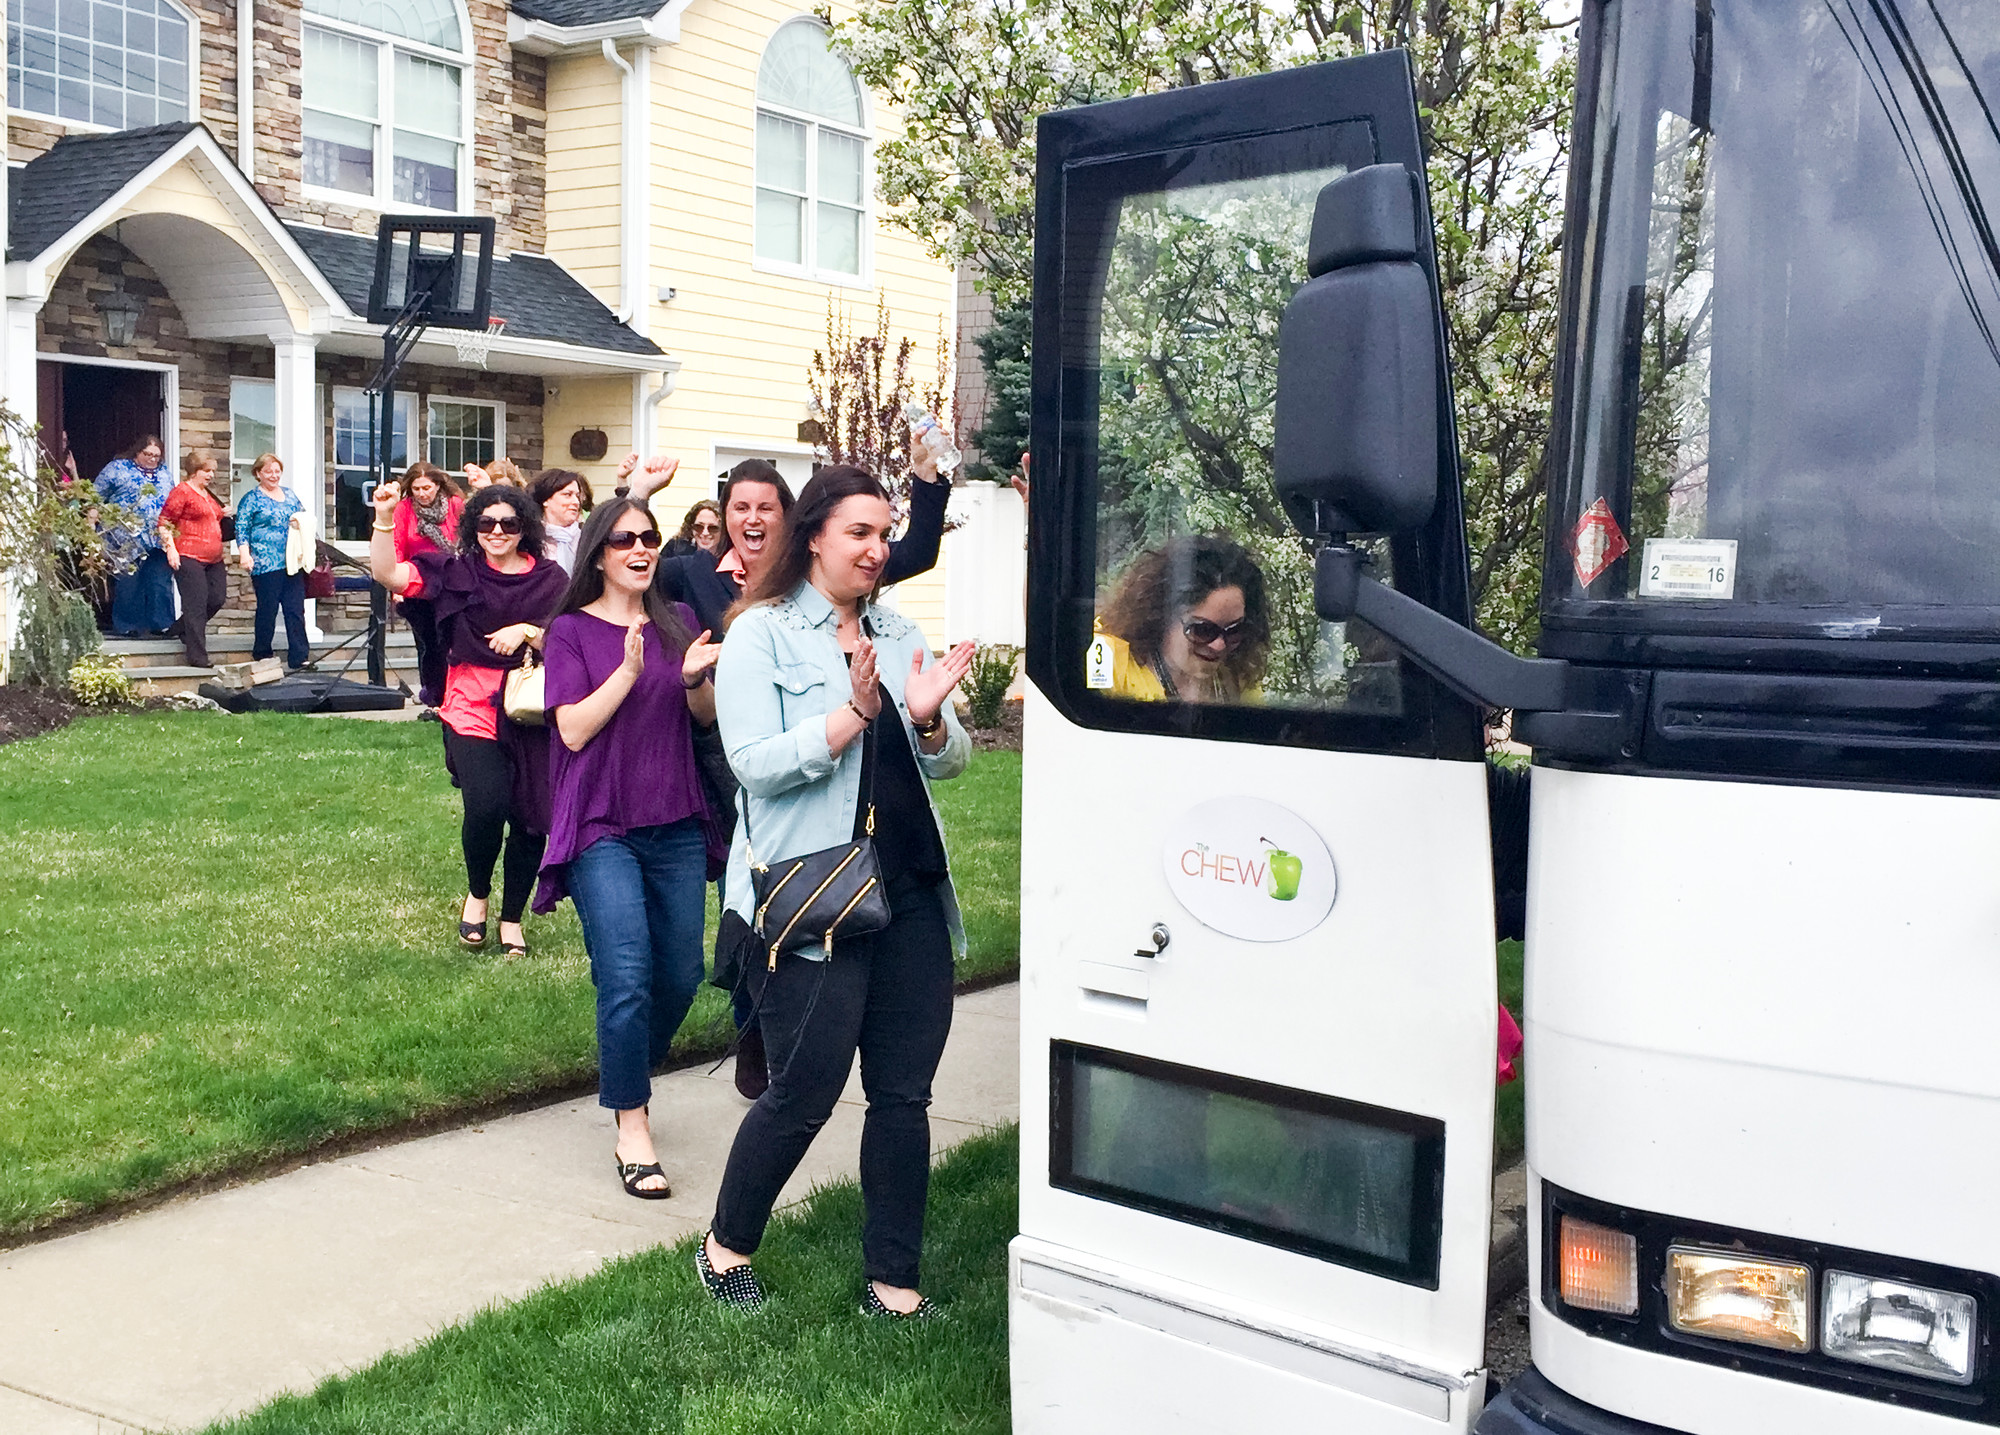 The Merrick Moms boarded the bus at Jodi Turk-Goldberg’s house on April 30 for the trip in to the show.